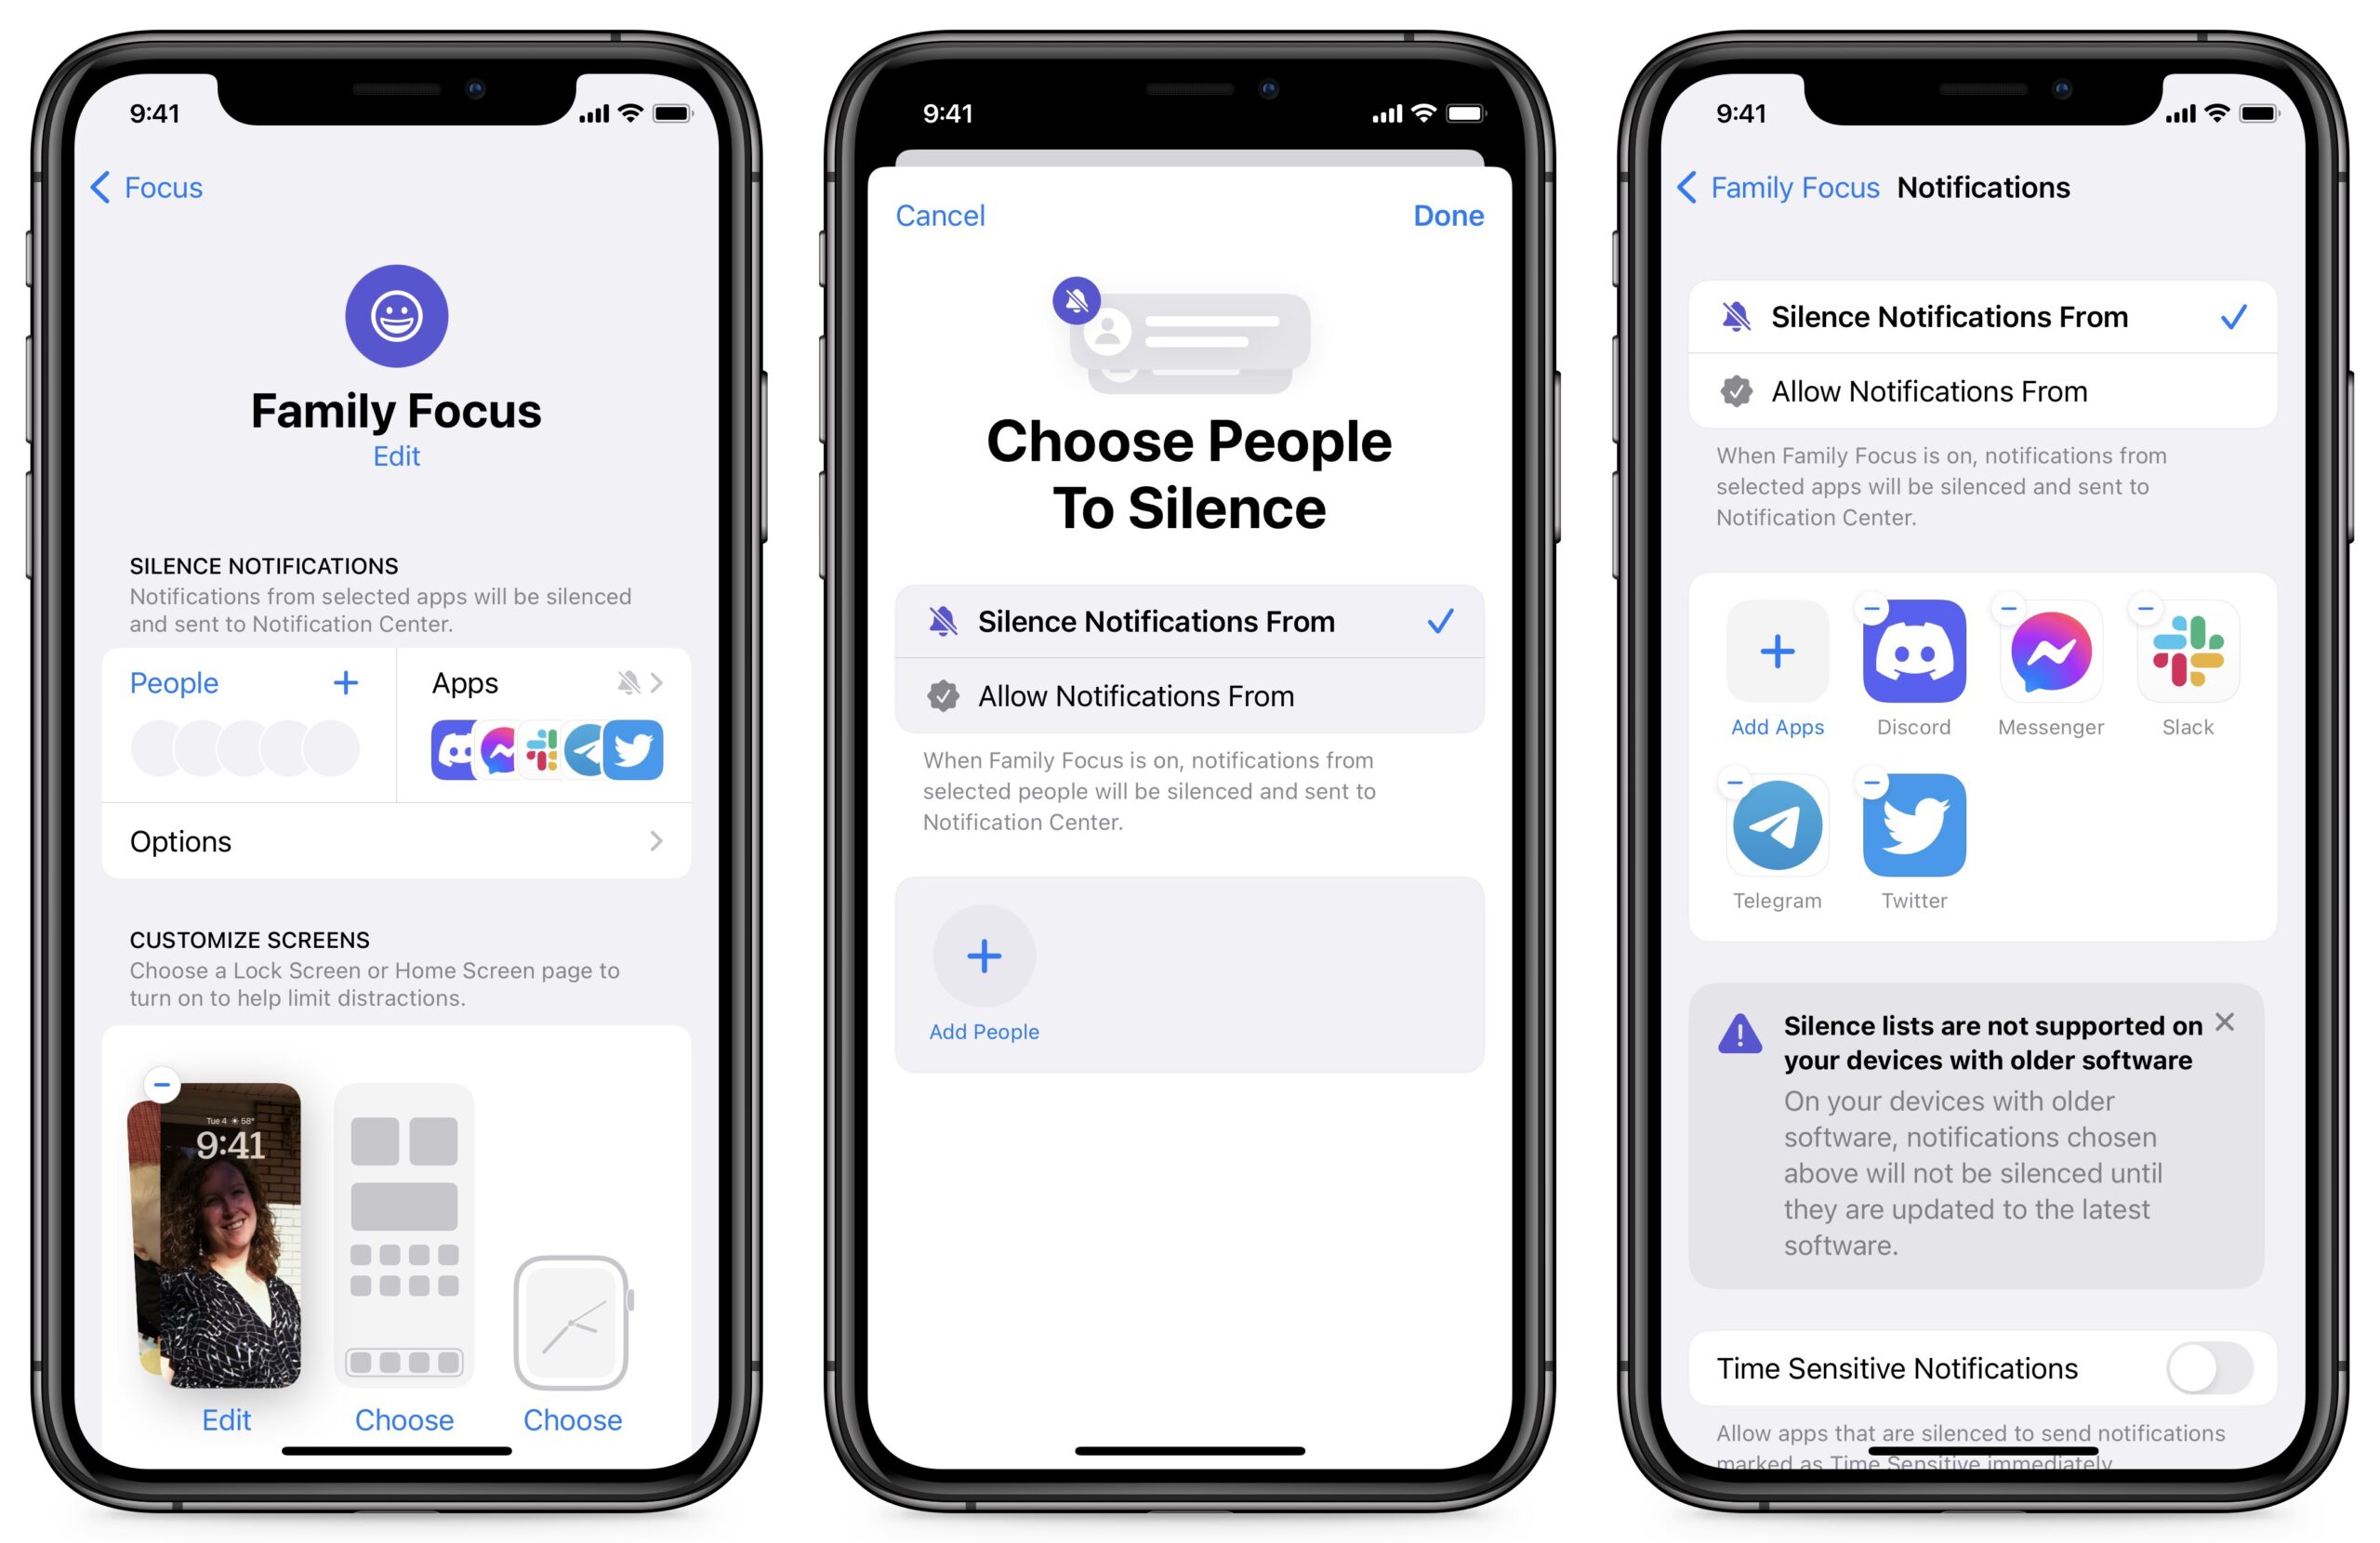 Customizing a Focus to not silence any people and silence certain apps